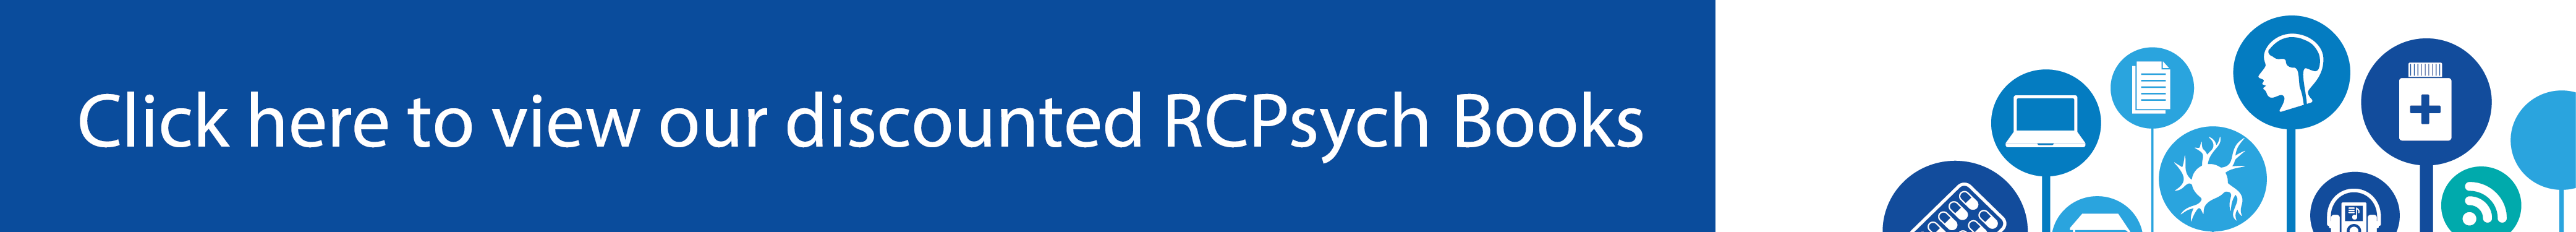 Click here to view all our discounted RCPsych Books